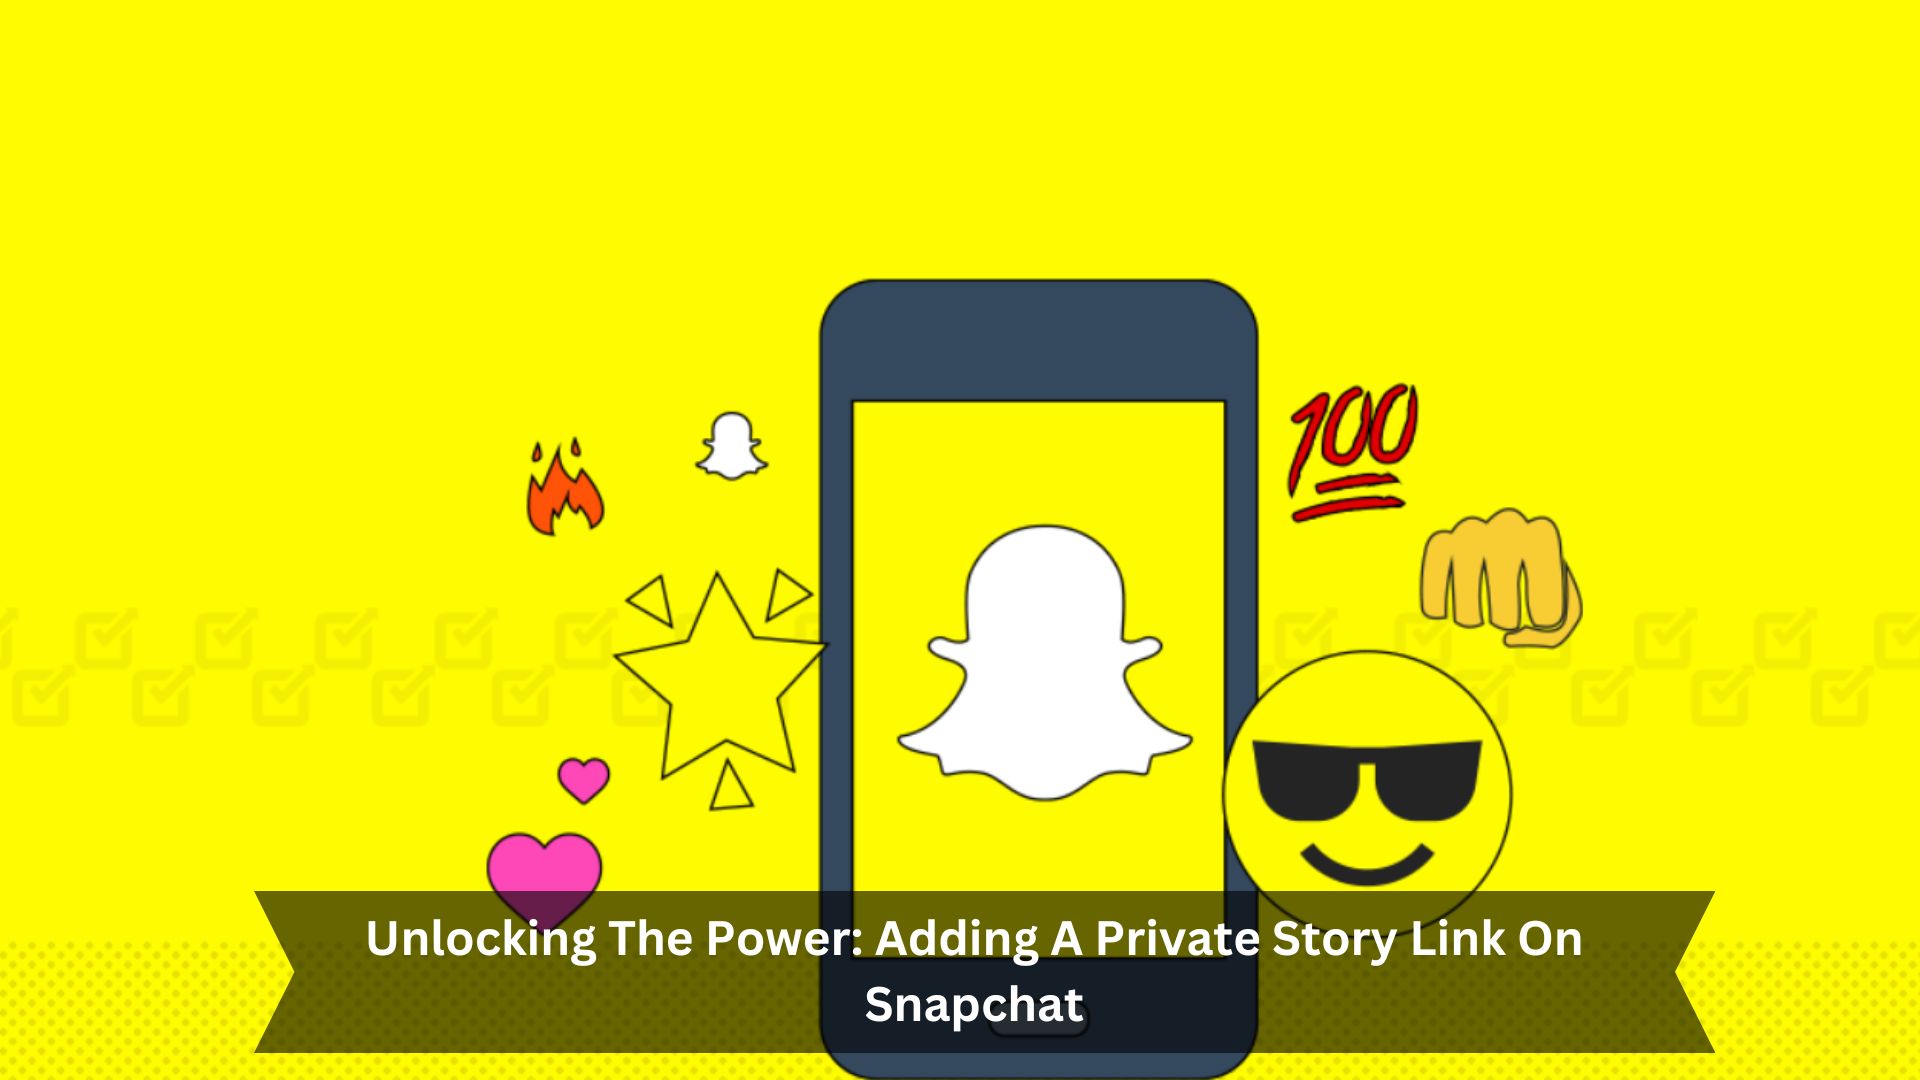 Unlocking-The-Power-Adding-A-Private-Story-Link-On-Snapchat